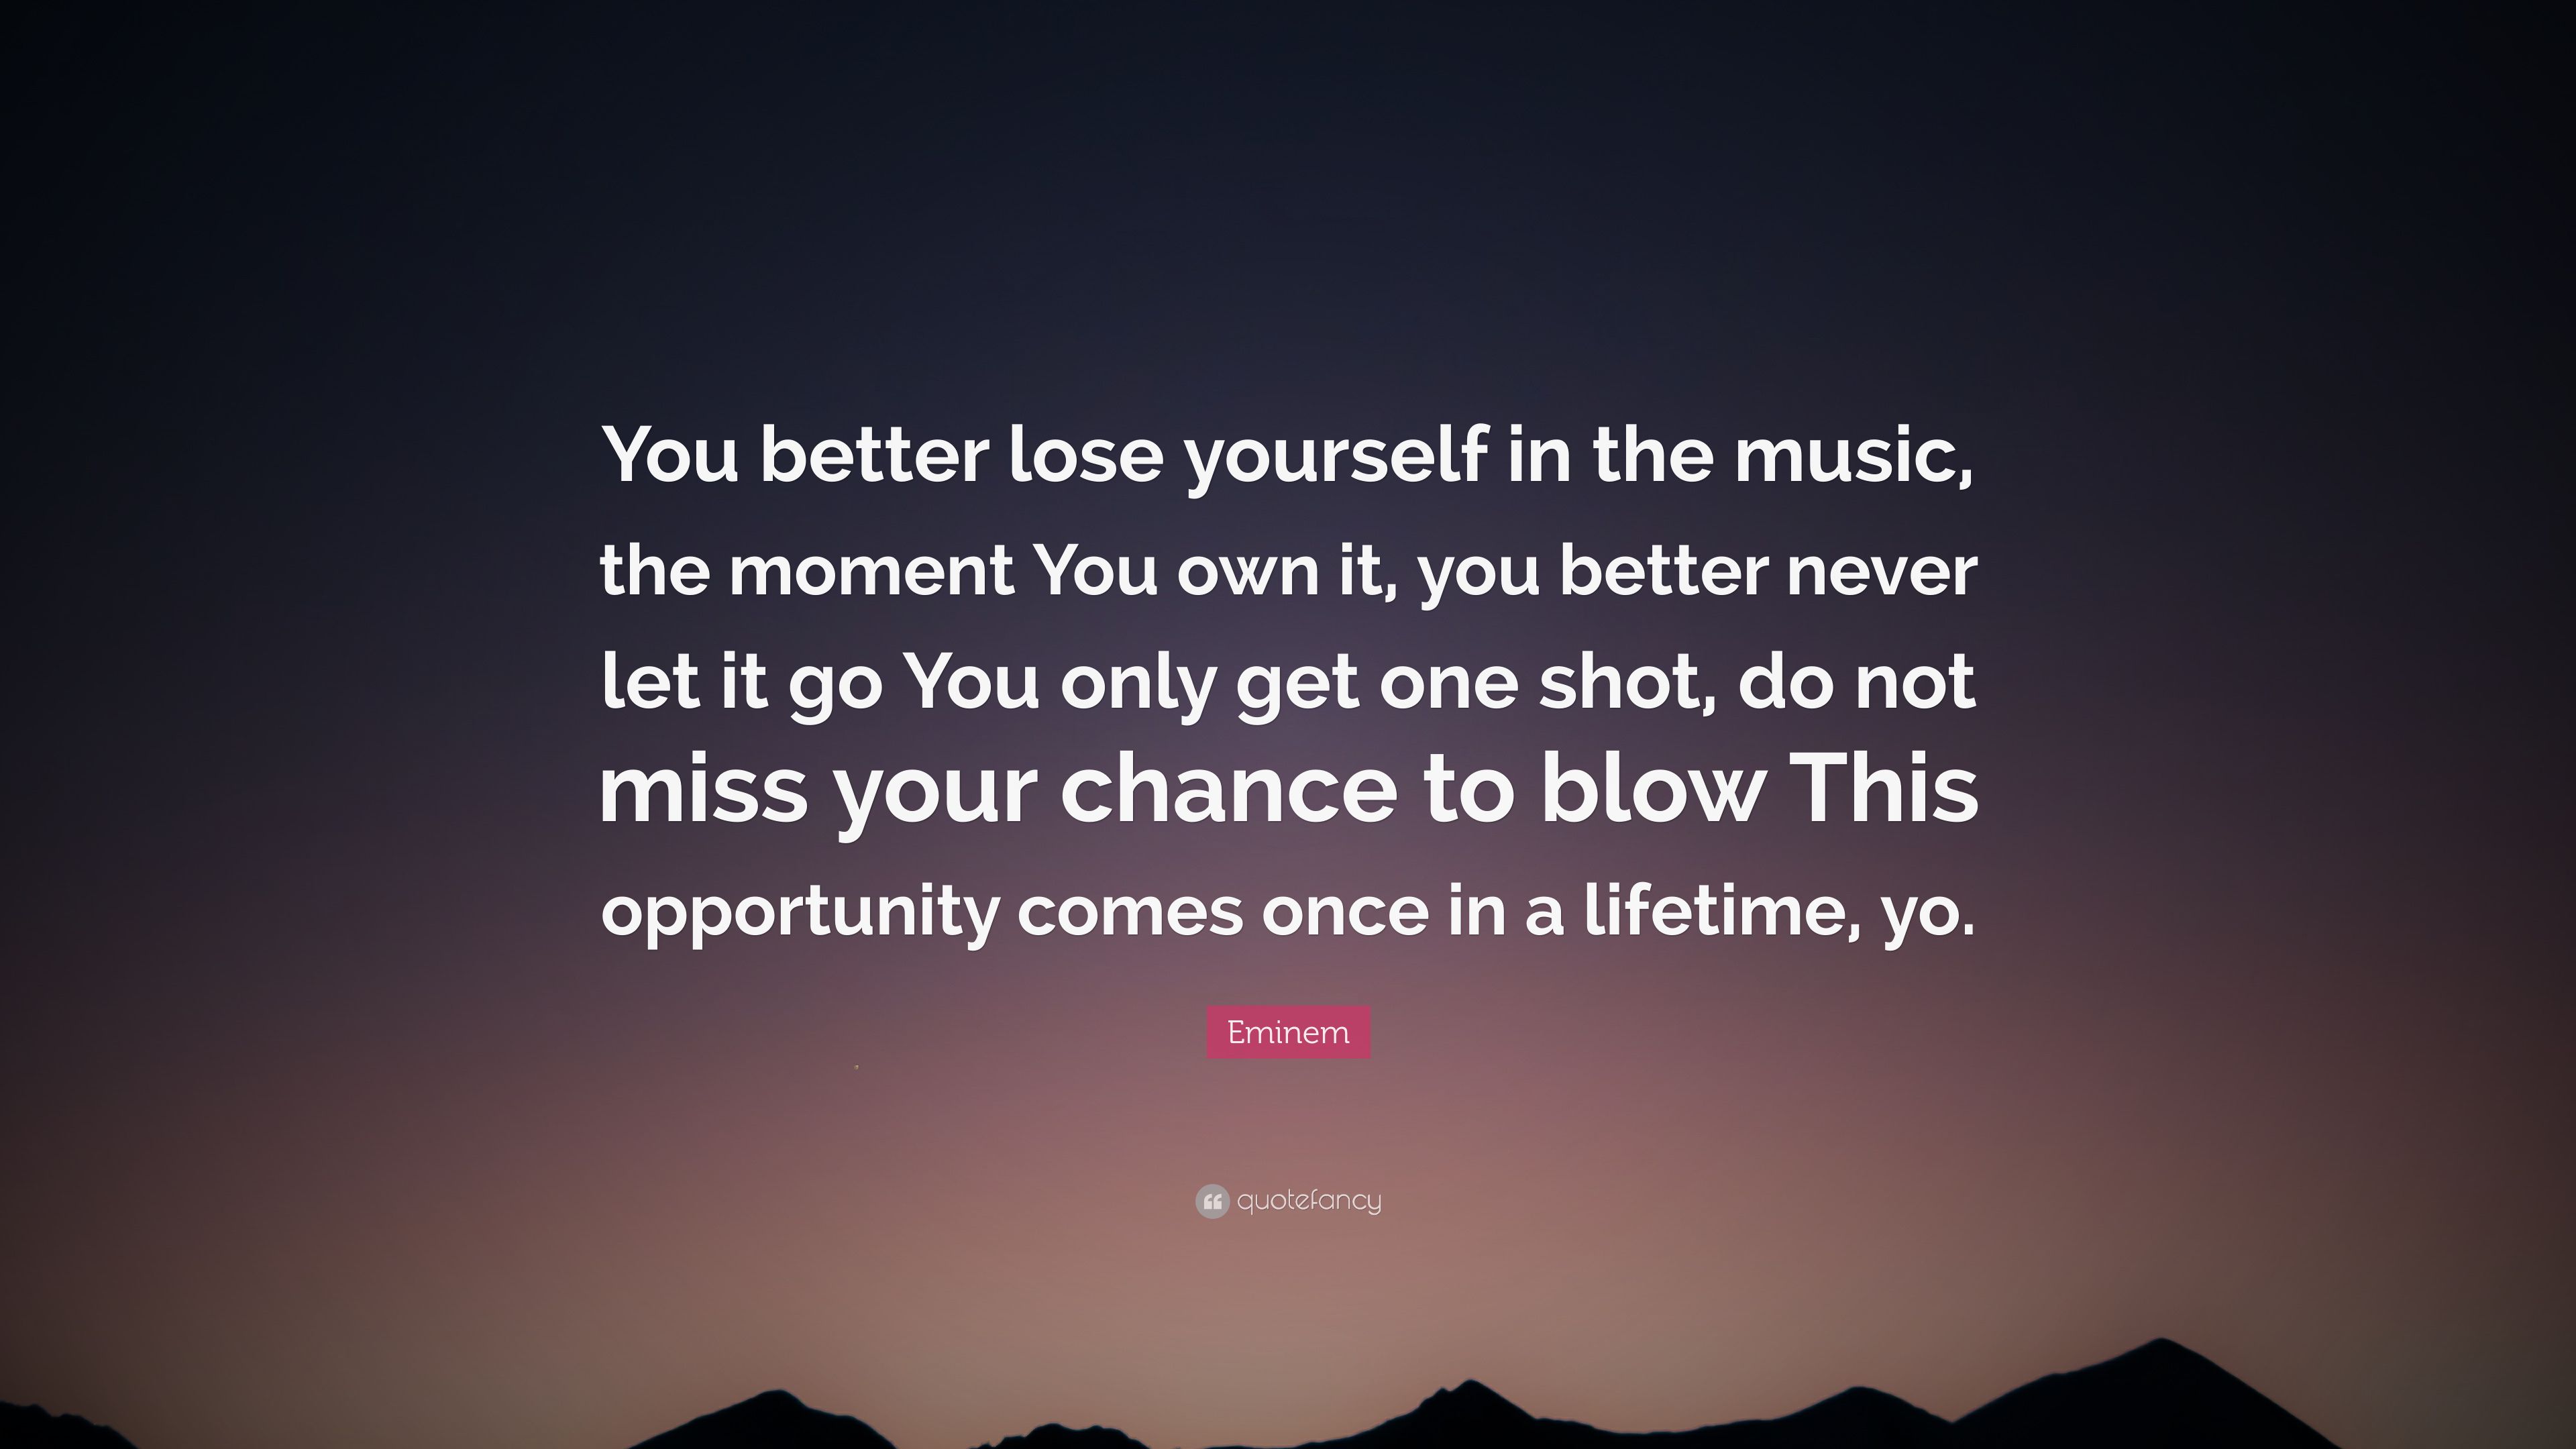 Eminem Quote: “You better lose yourself in the music, the moment